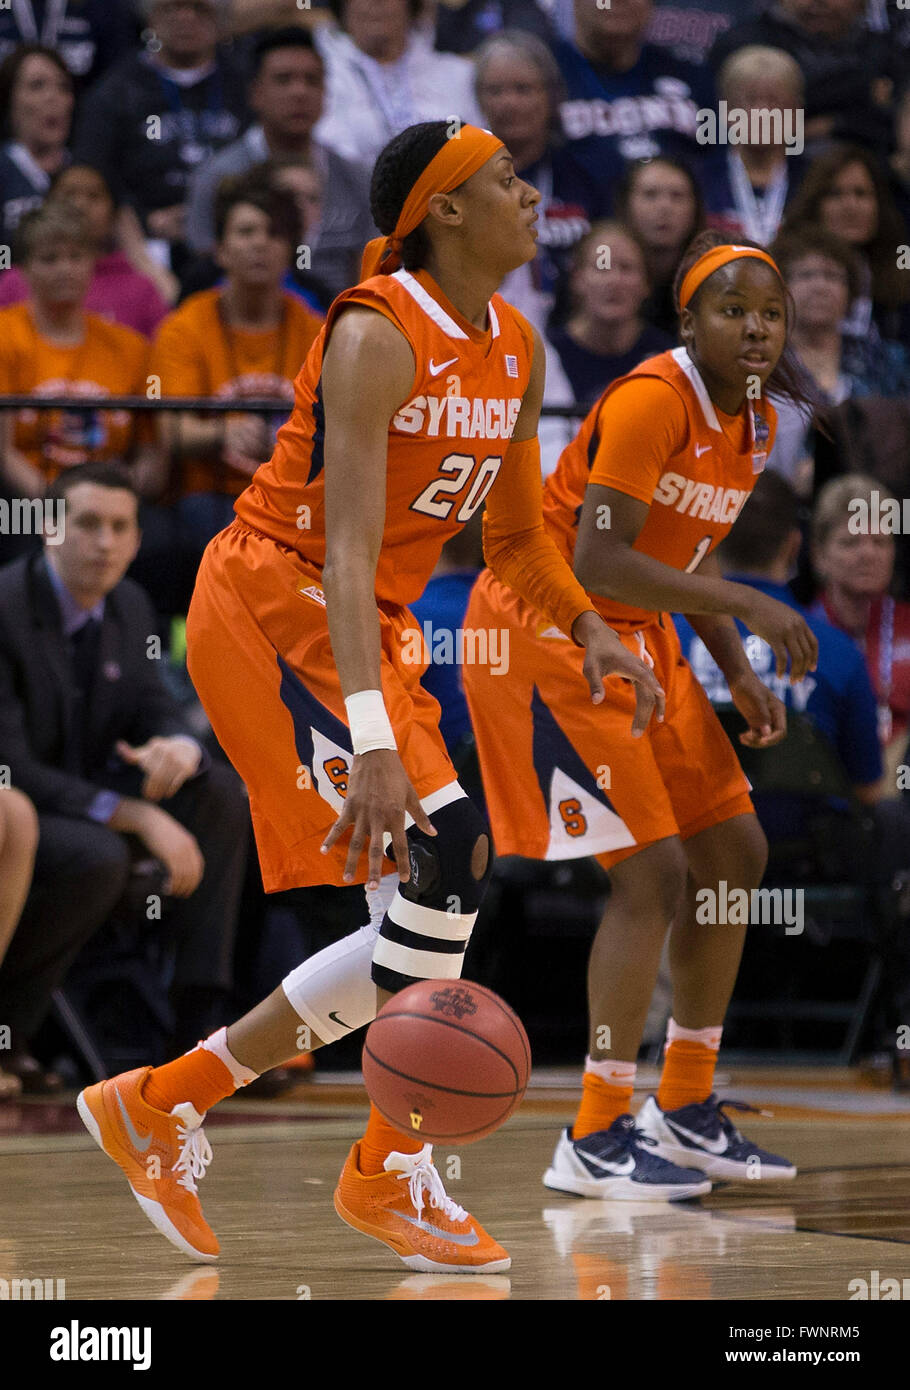 April 05, 2016: Syracuse guard Brittney Sykes (20) dribbles the ball during NCAA Basketball game action between the Syracuse Orange and the Connecticut Huskies at Bankers Life Fieldhouse in Indianapolis, Indiana. Connecticut defeated Syracuse 82-51. John Mersits/CSM Stock Photo